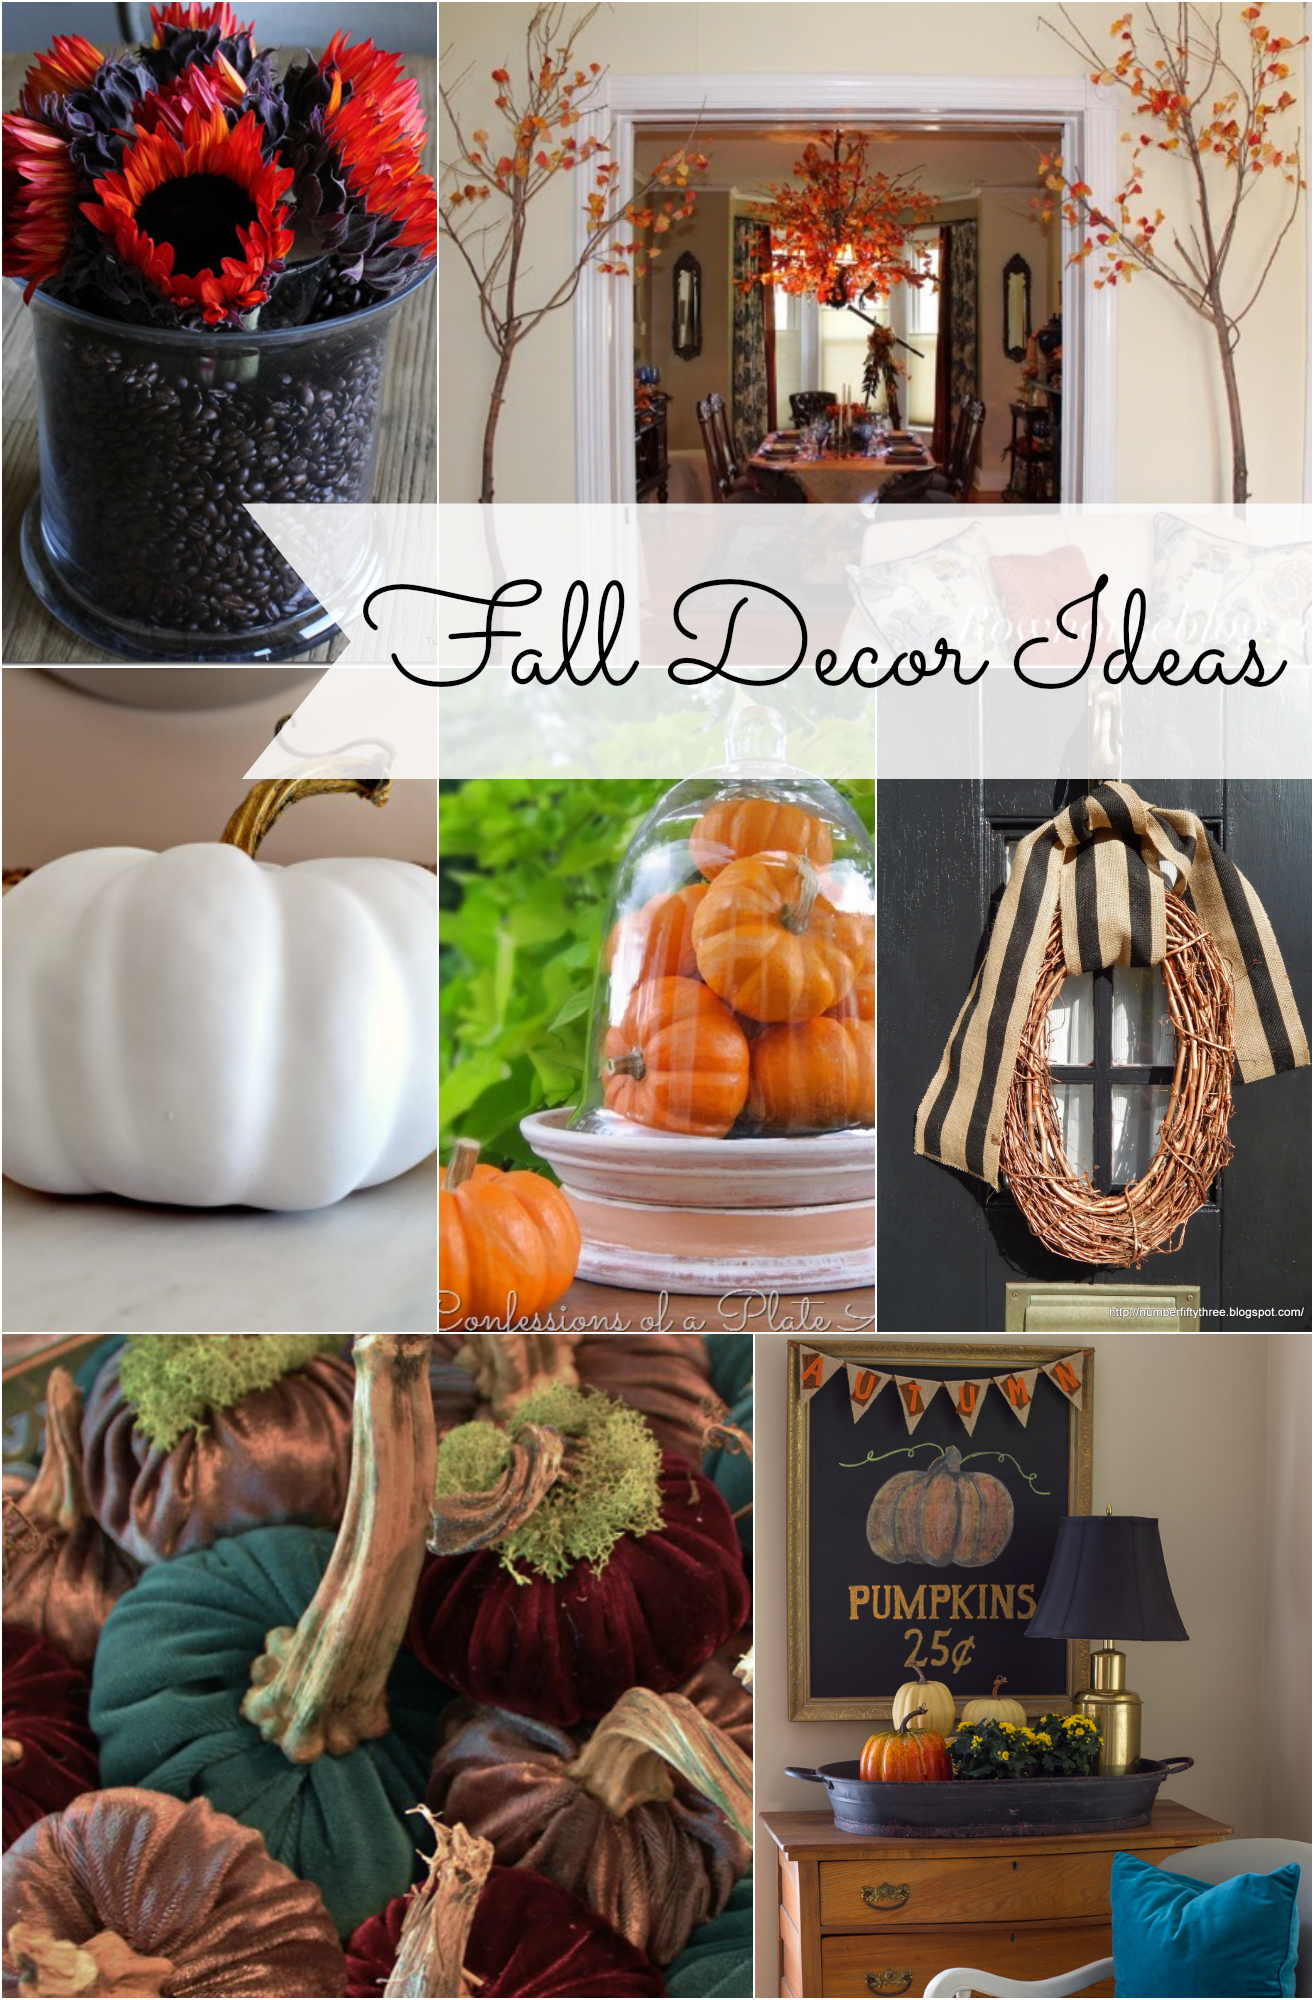 Fall Decorating Ideas For Inside The Home - disabledfashiondesignschool